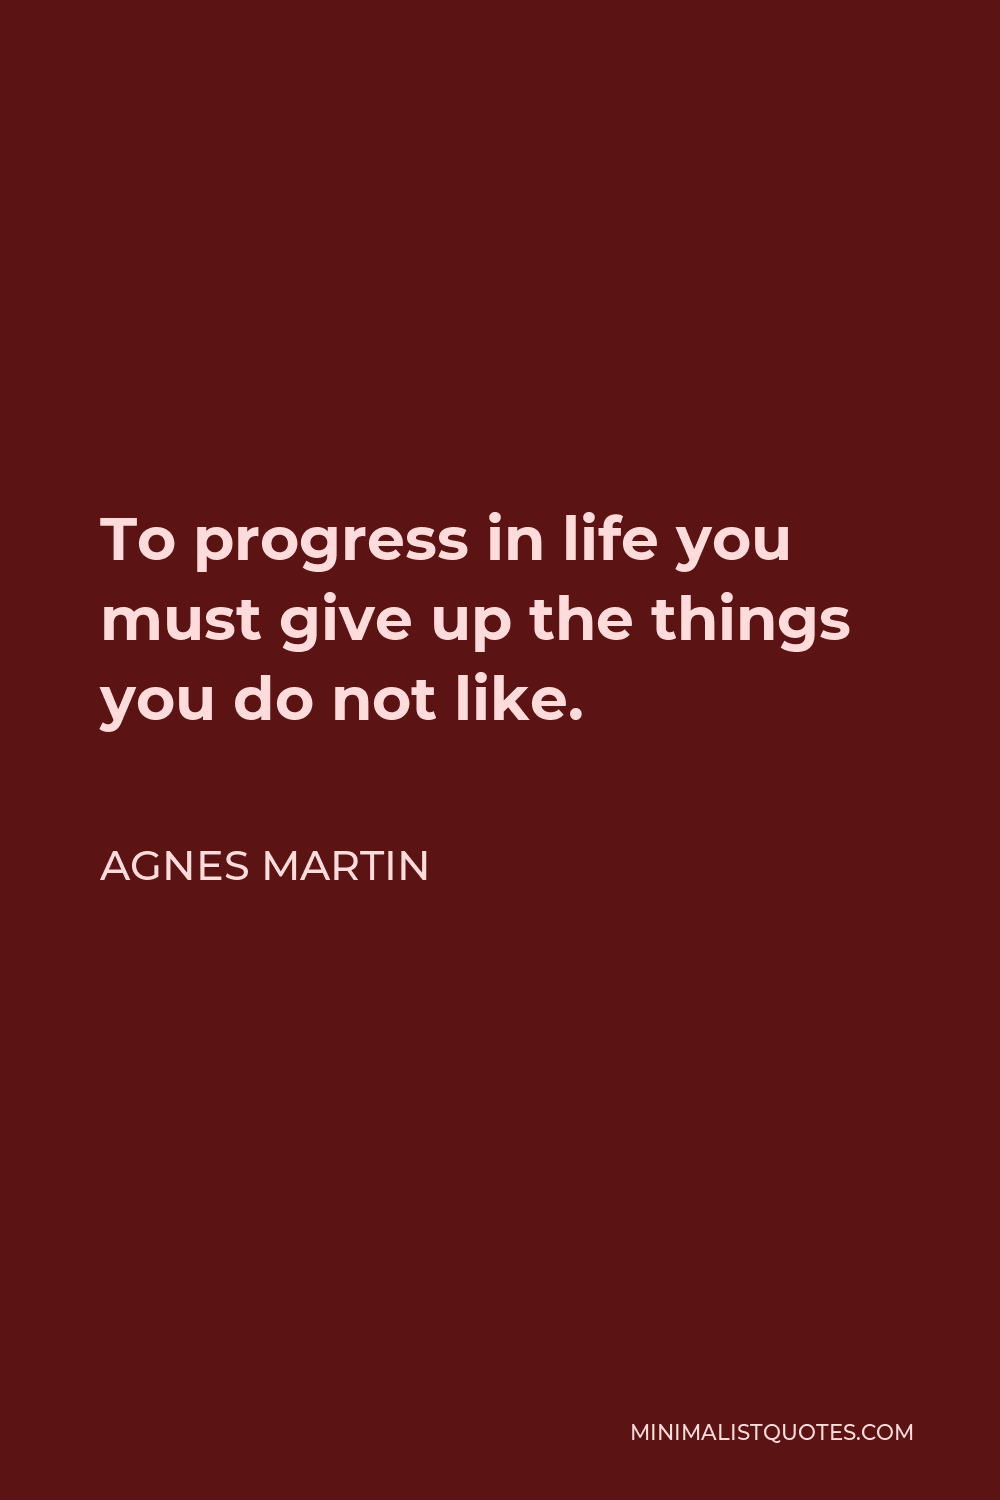 Agnes Martin Quote - To progress in life you must give up the things you do not like.